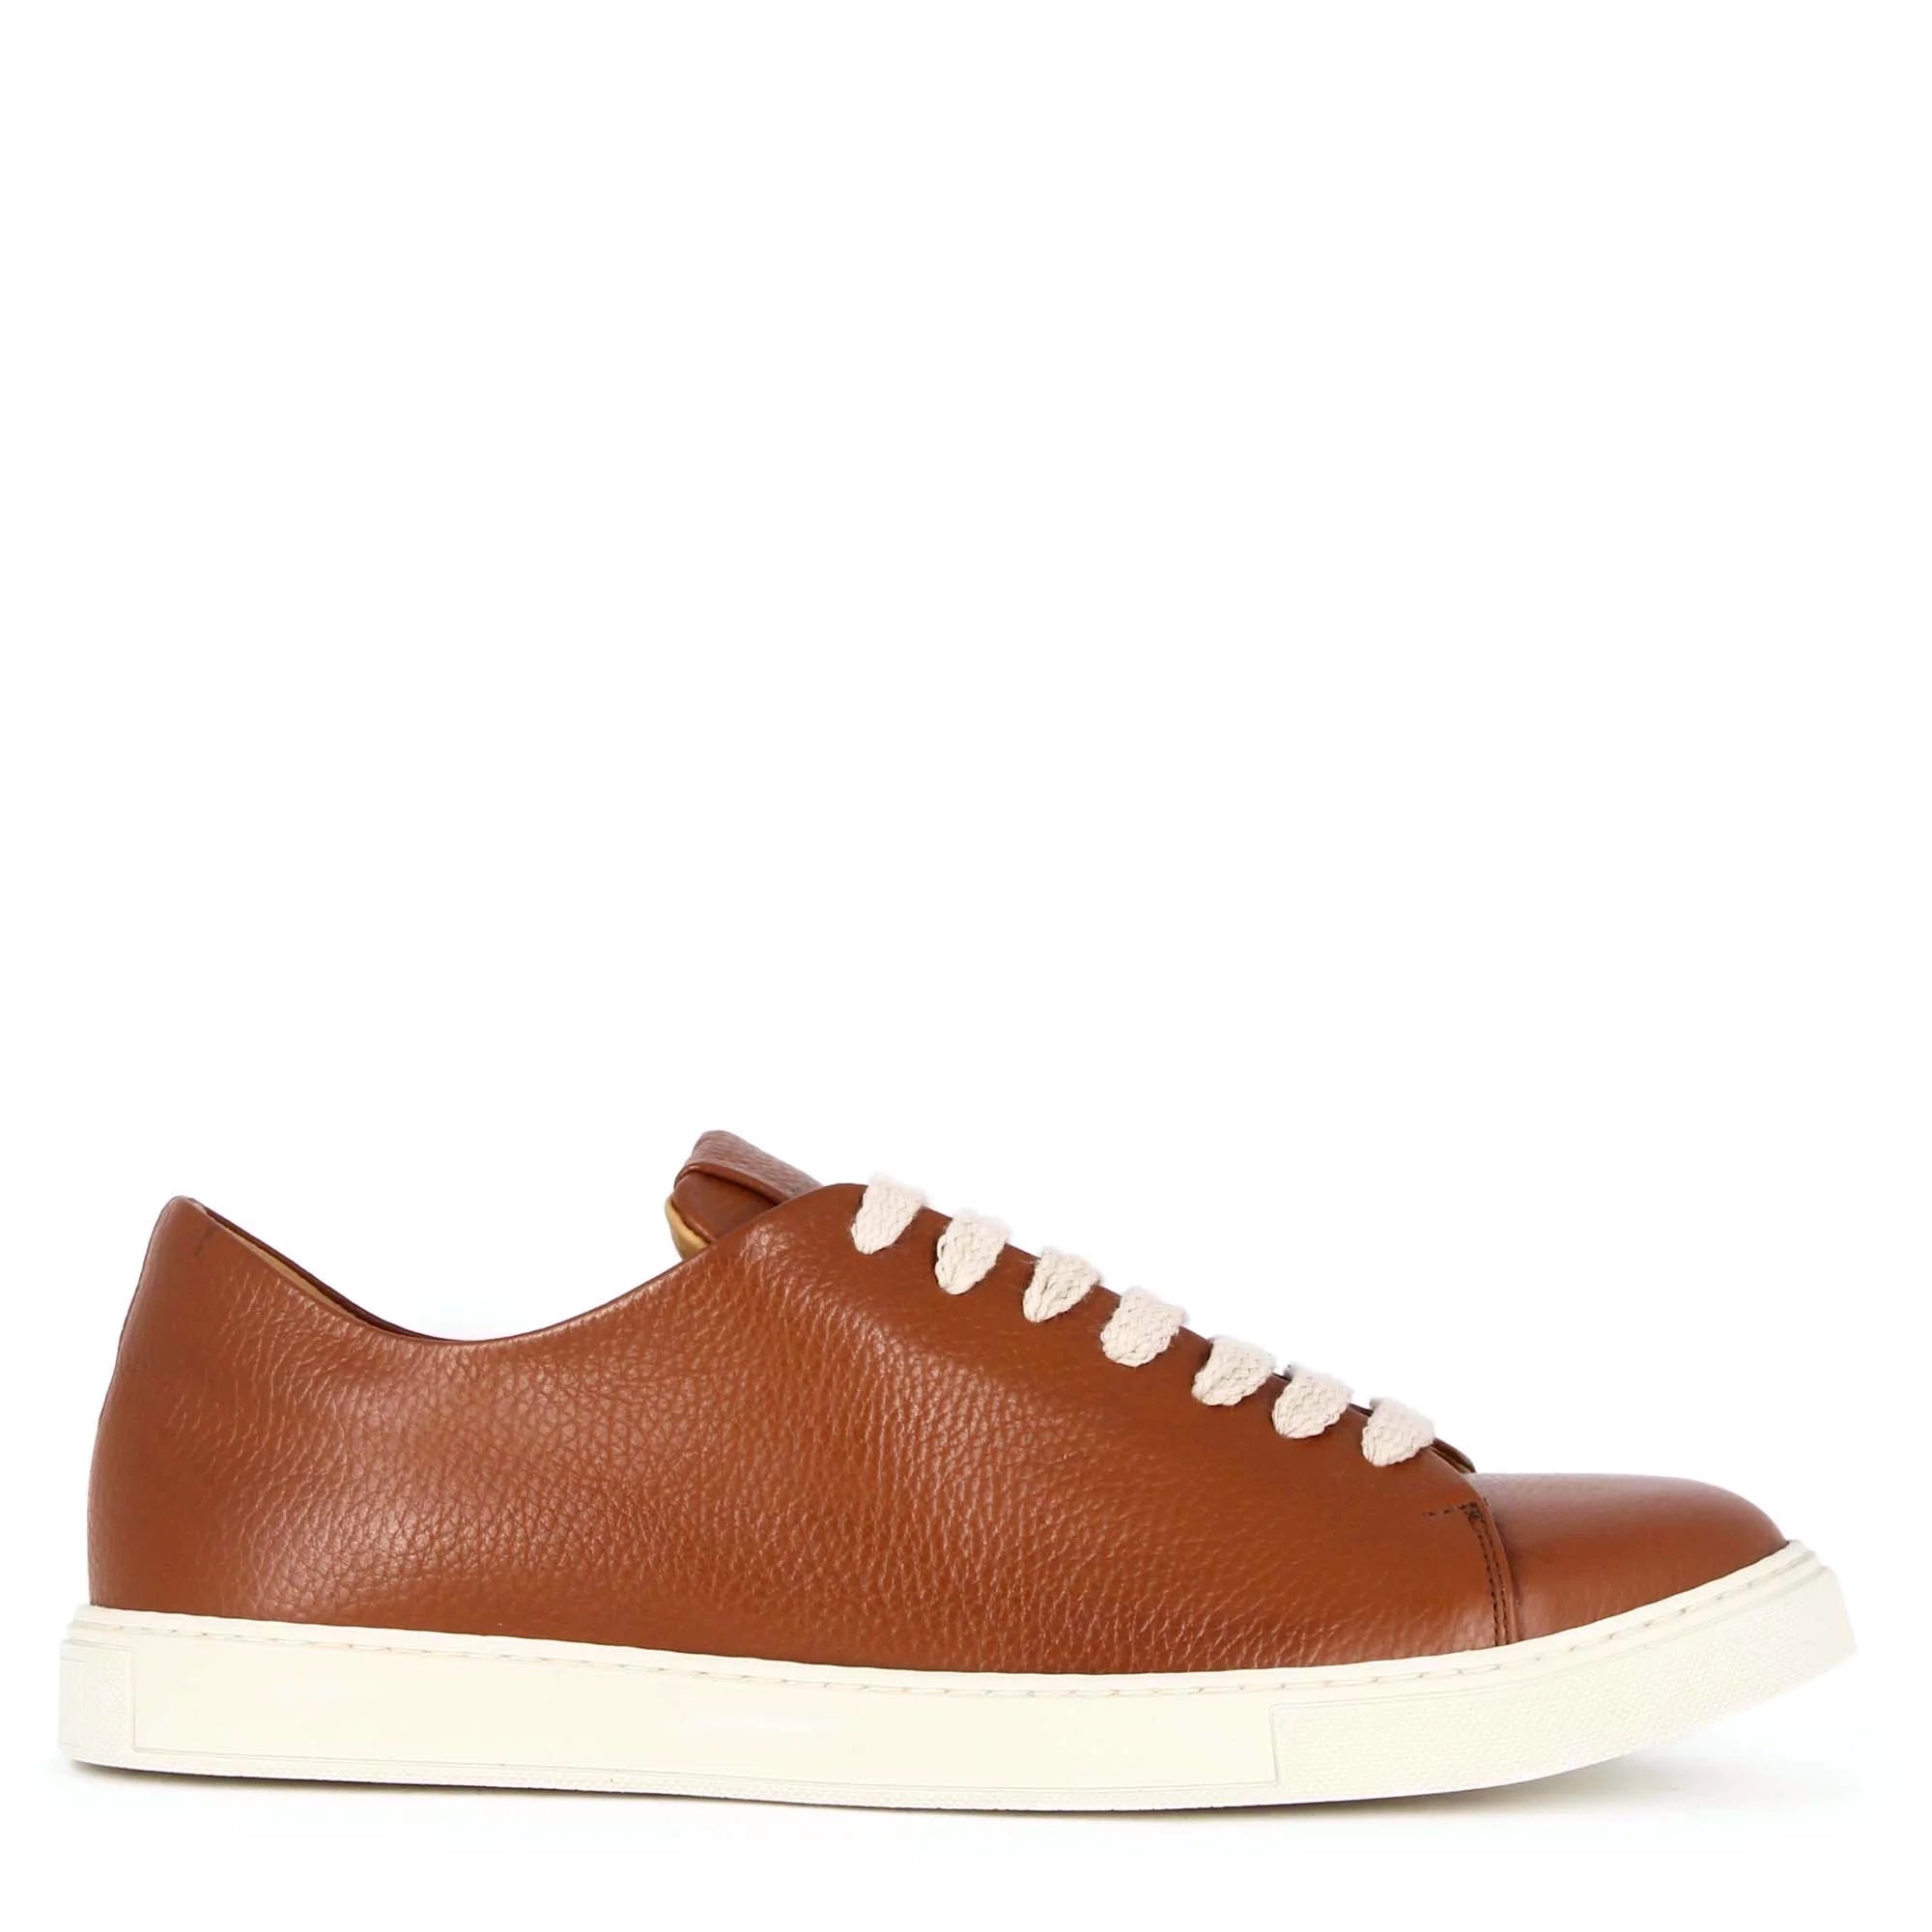 Classic Brown Leather Sneaker